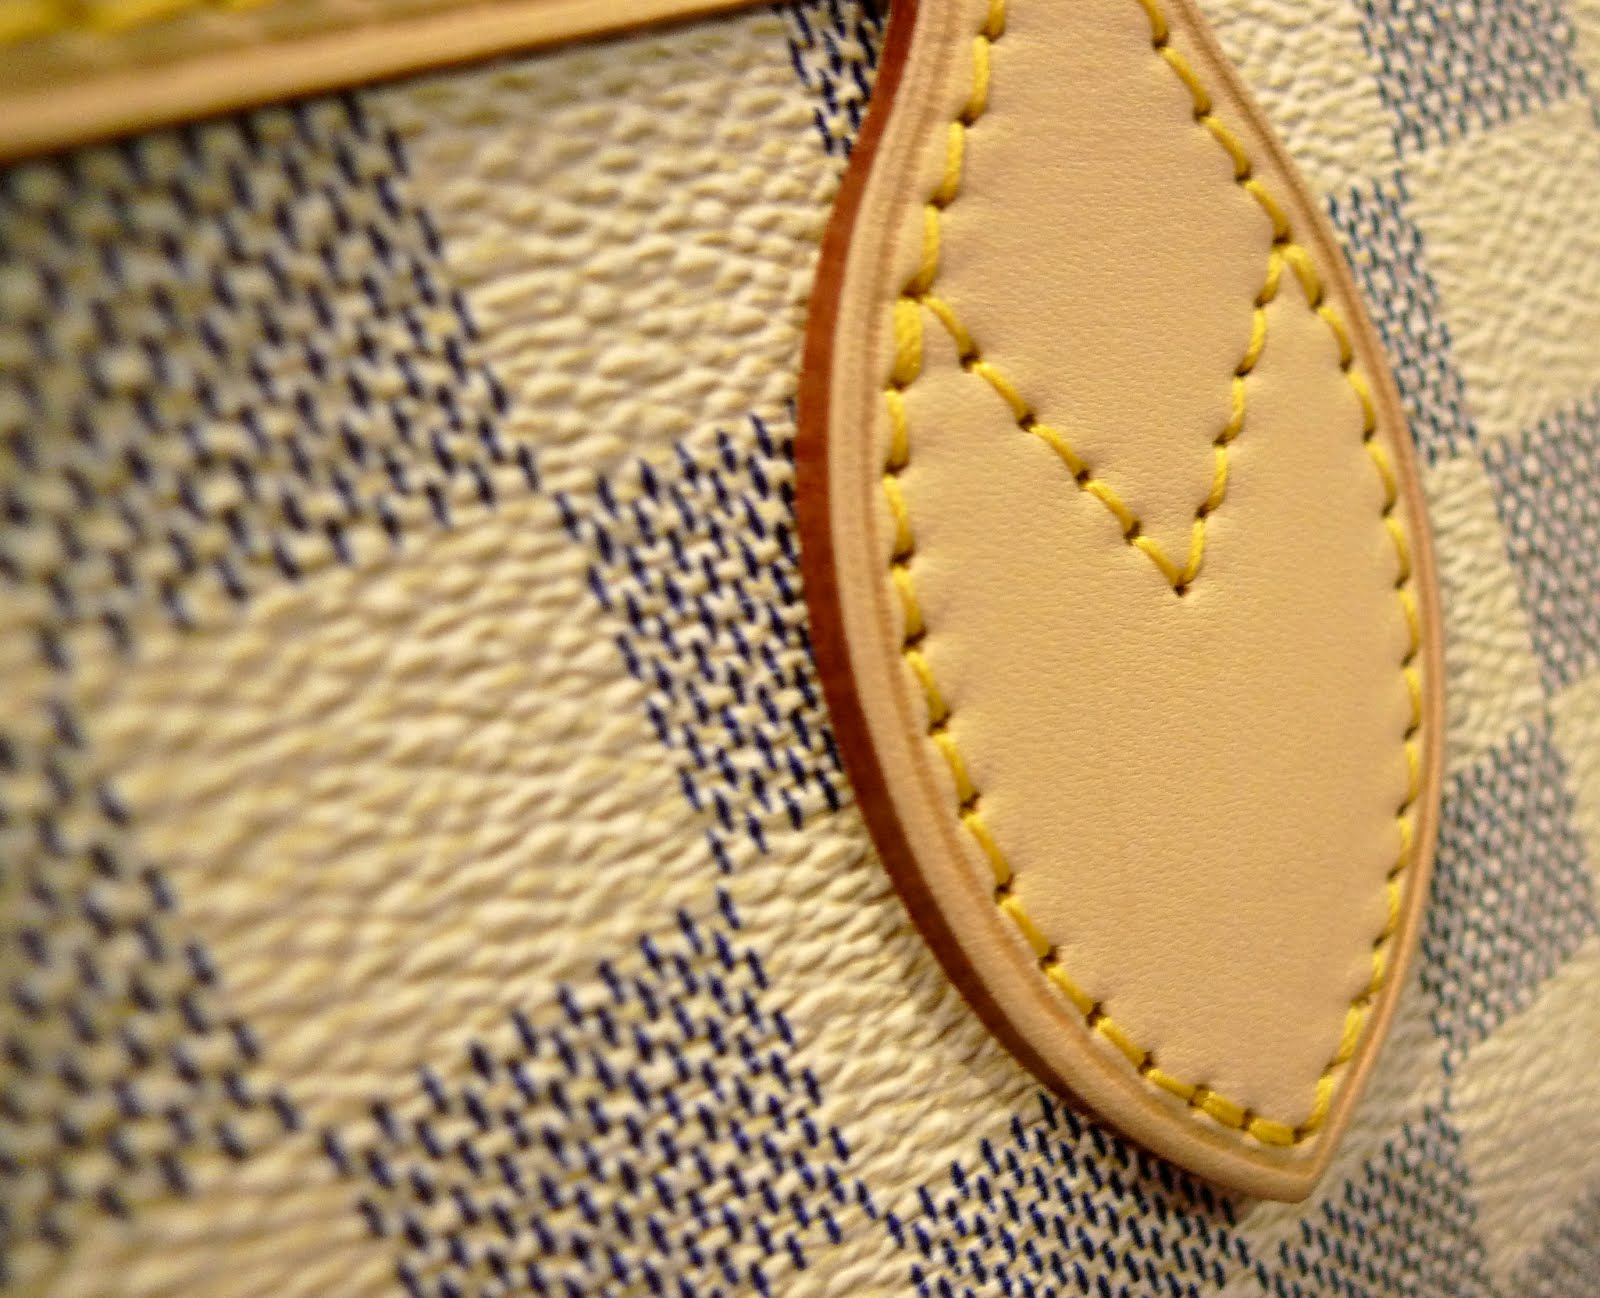 Should I Buy Damier Azur from Louis Vuitton? Everything to Know Before You  Buy 